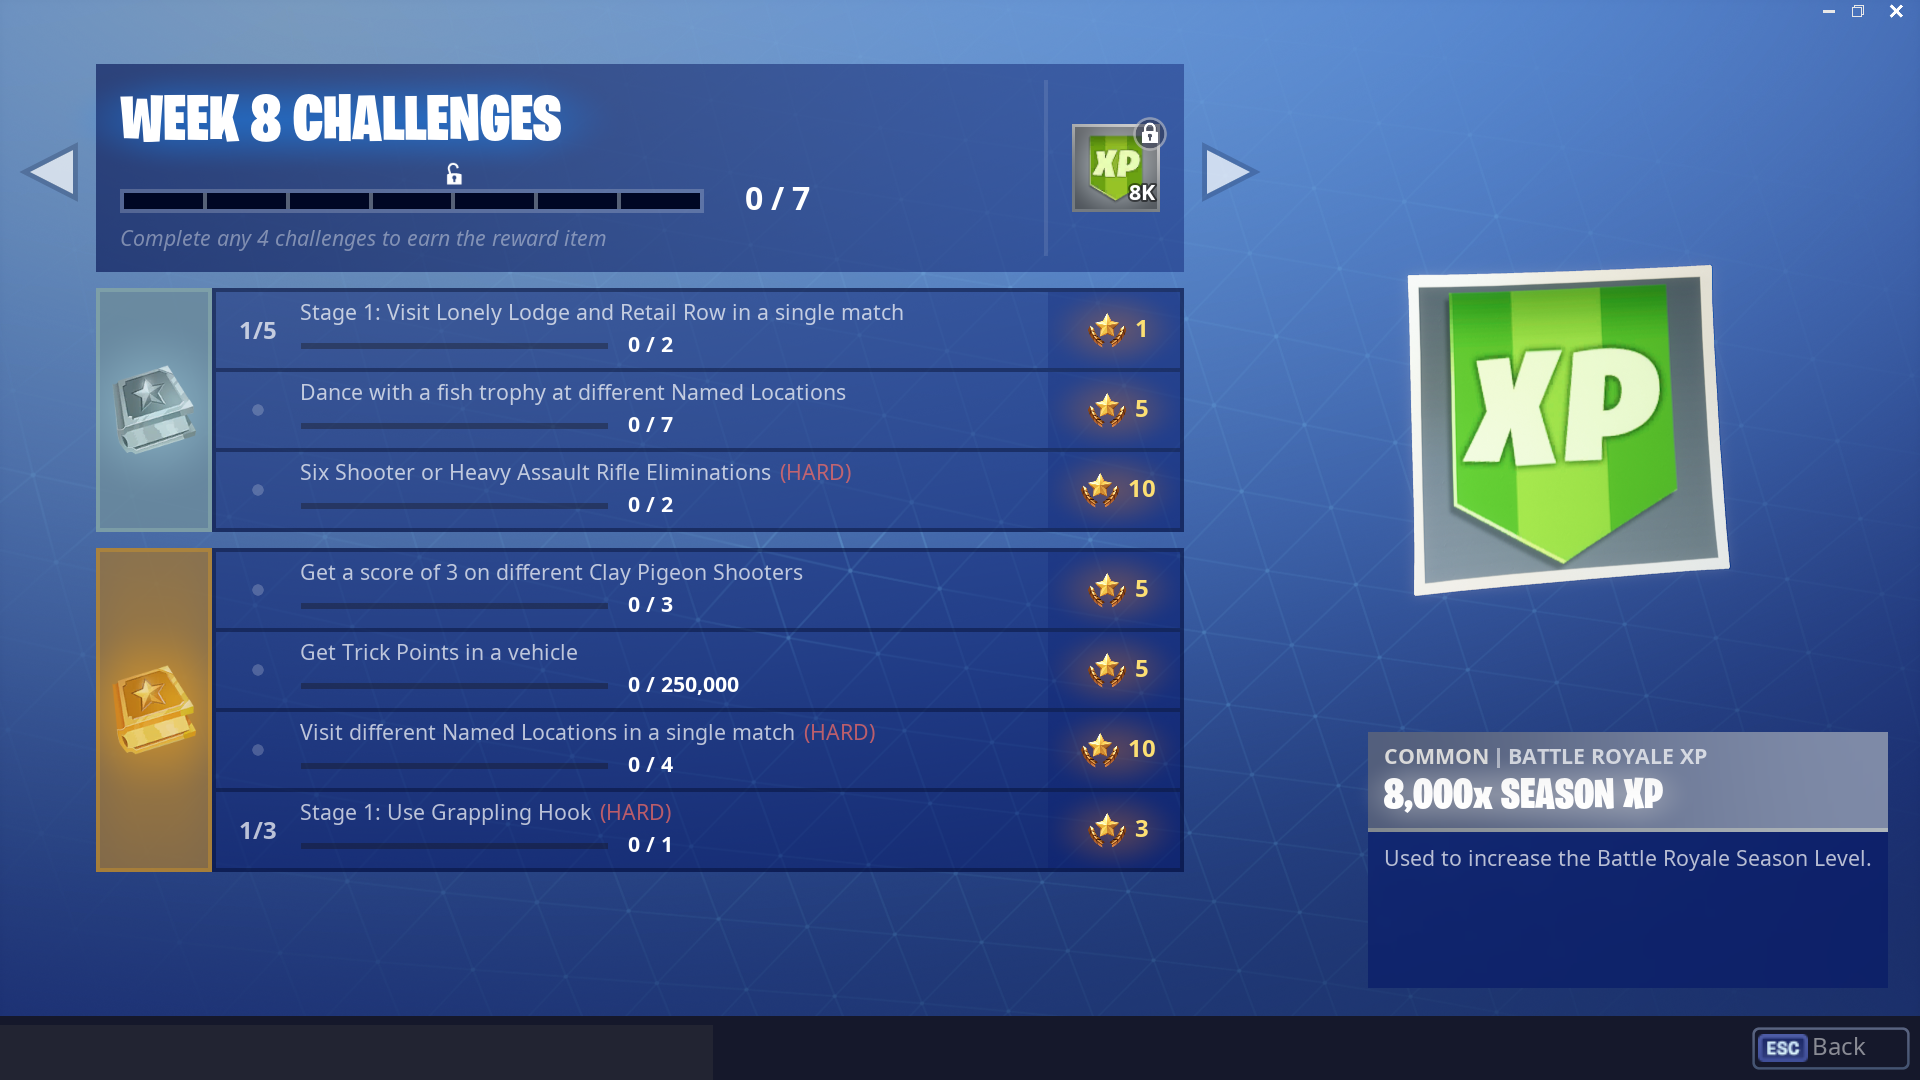 Battle Pass Challenges And Solutions For Fortnite Battle Royale - battle pass challenges and solutions for fortnite battle royale week 8 season 6 fortnite news and statistics ss1